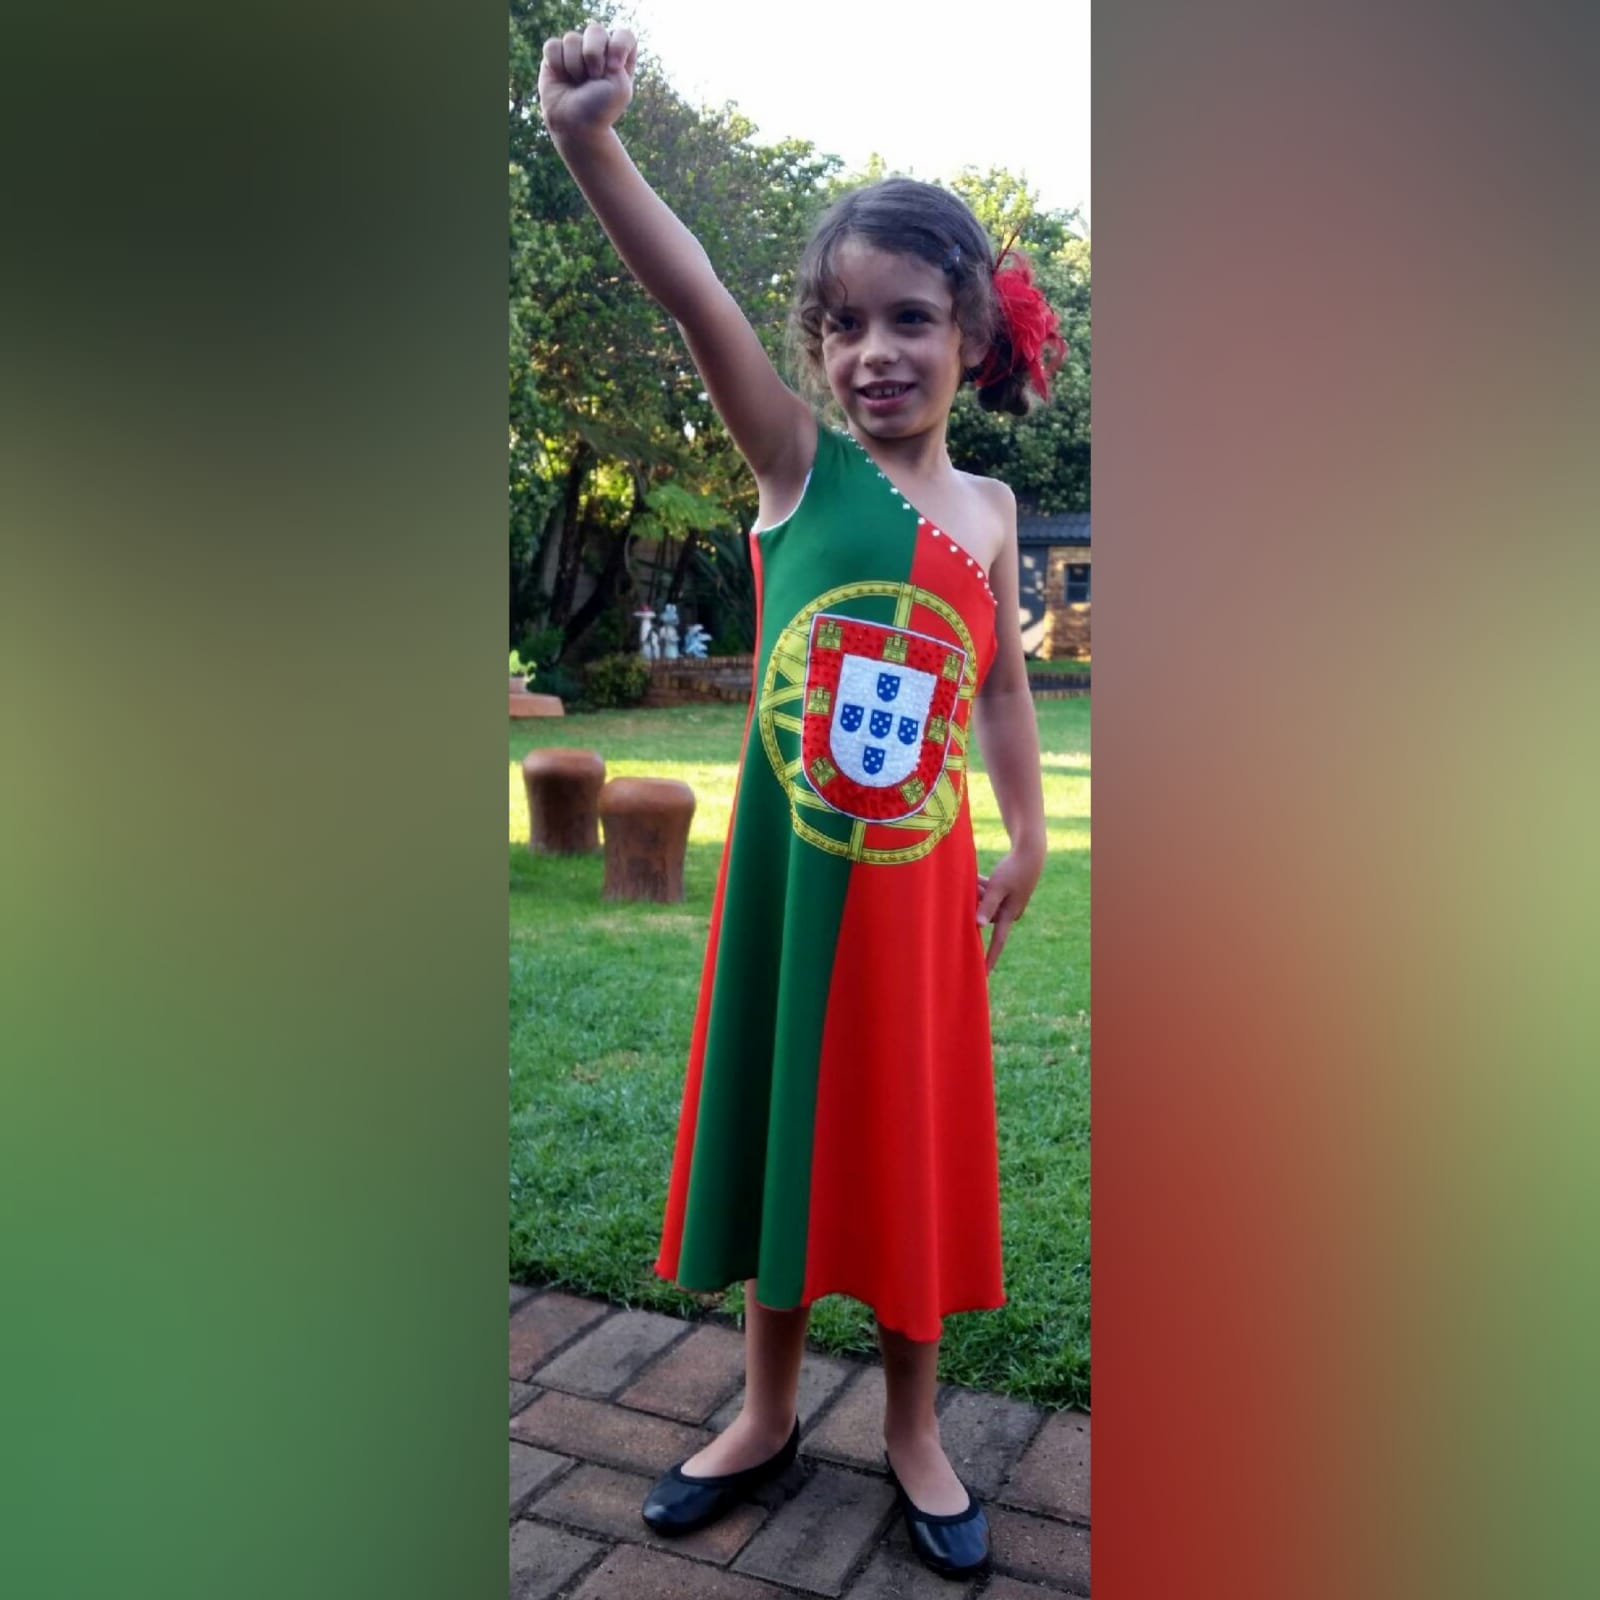 Portuguese flag and south african flag dress 1 single shoulder dress with the portuguese flag in the front and the south african flag at the back. Bead detailing on the front and the back. Worn for heritage day. She won a prize for best dressed.